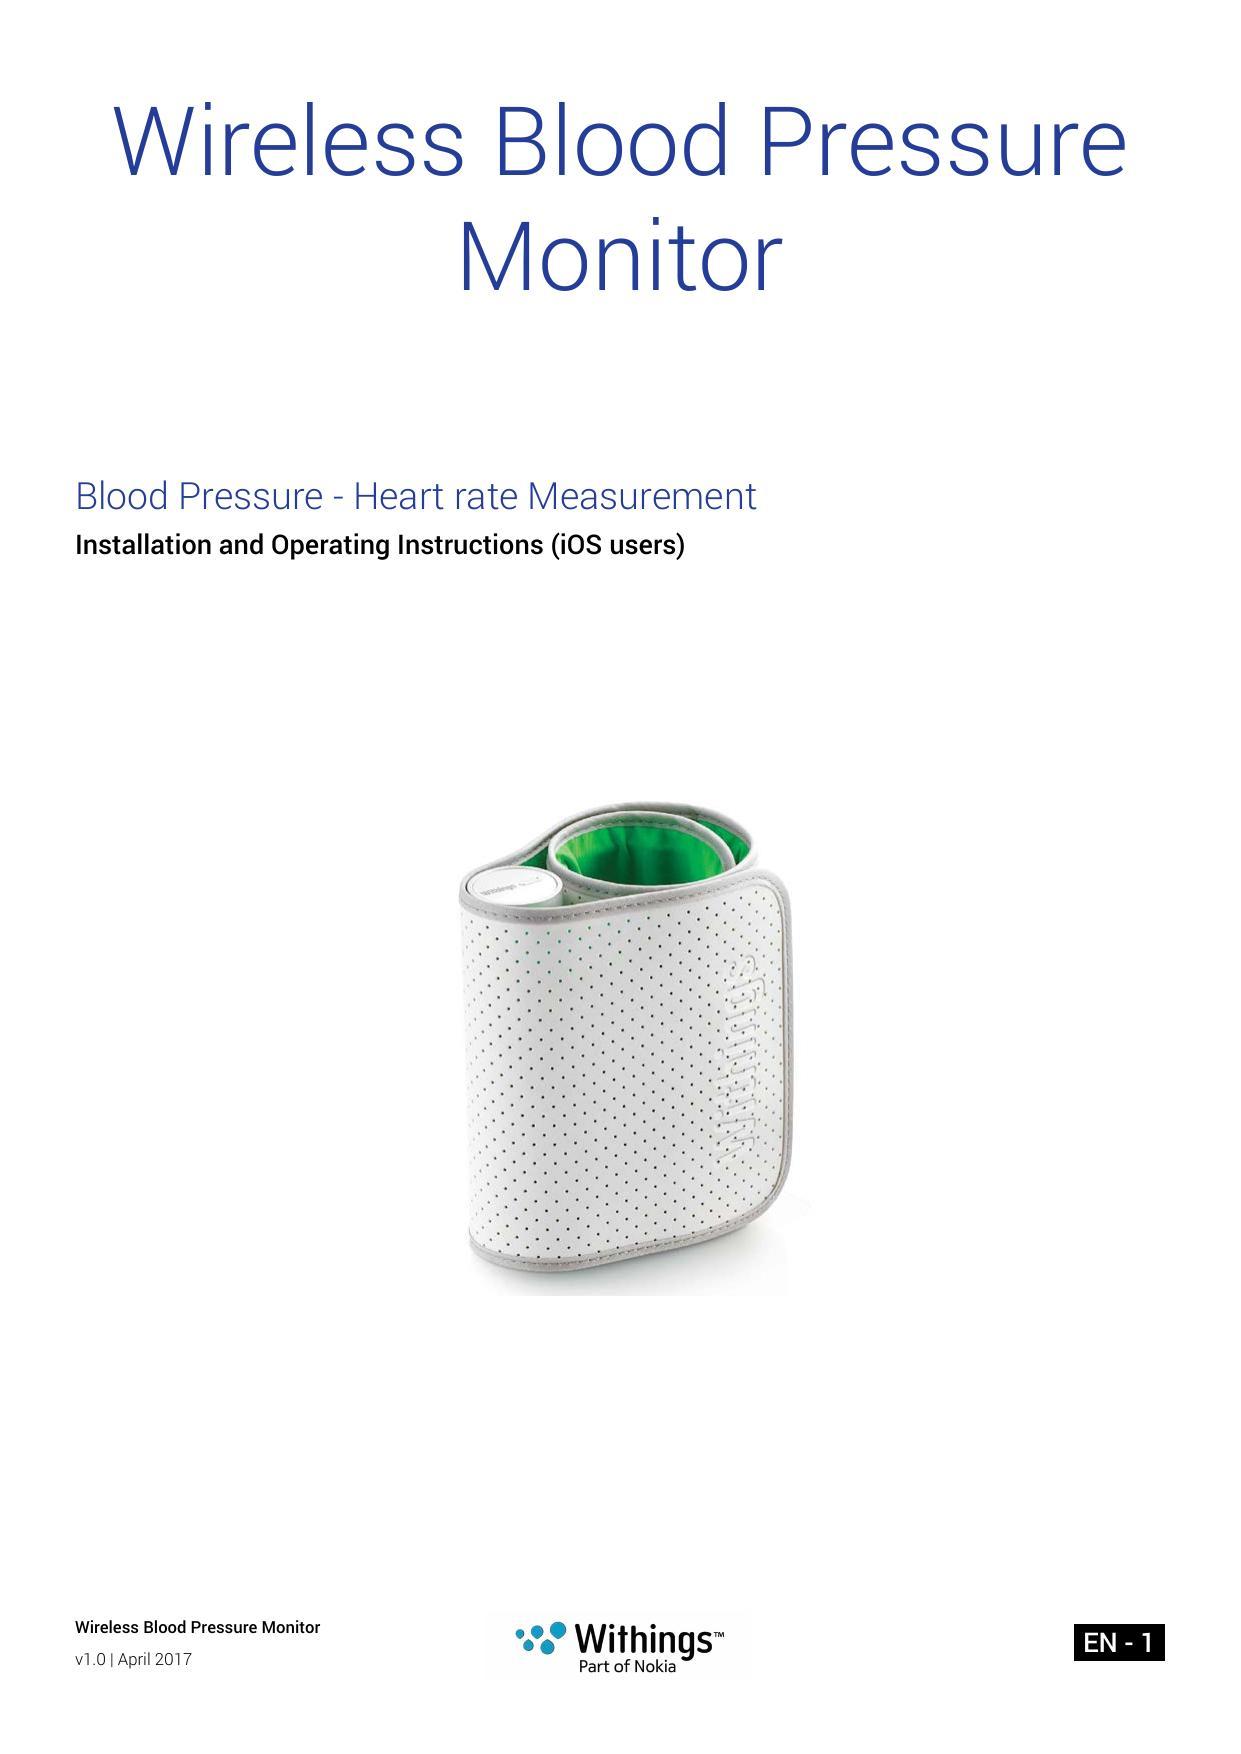 wireless-blood-pressure-monitor-blood-pressure-heart-rate-measurement-installation-and-operating-instructions-ios-users.pdf